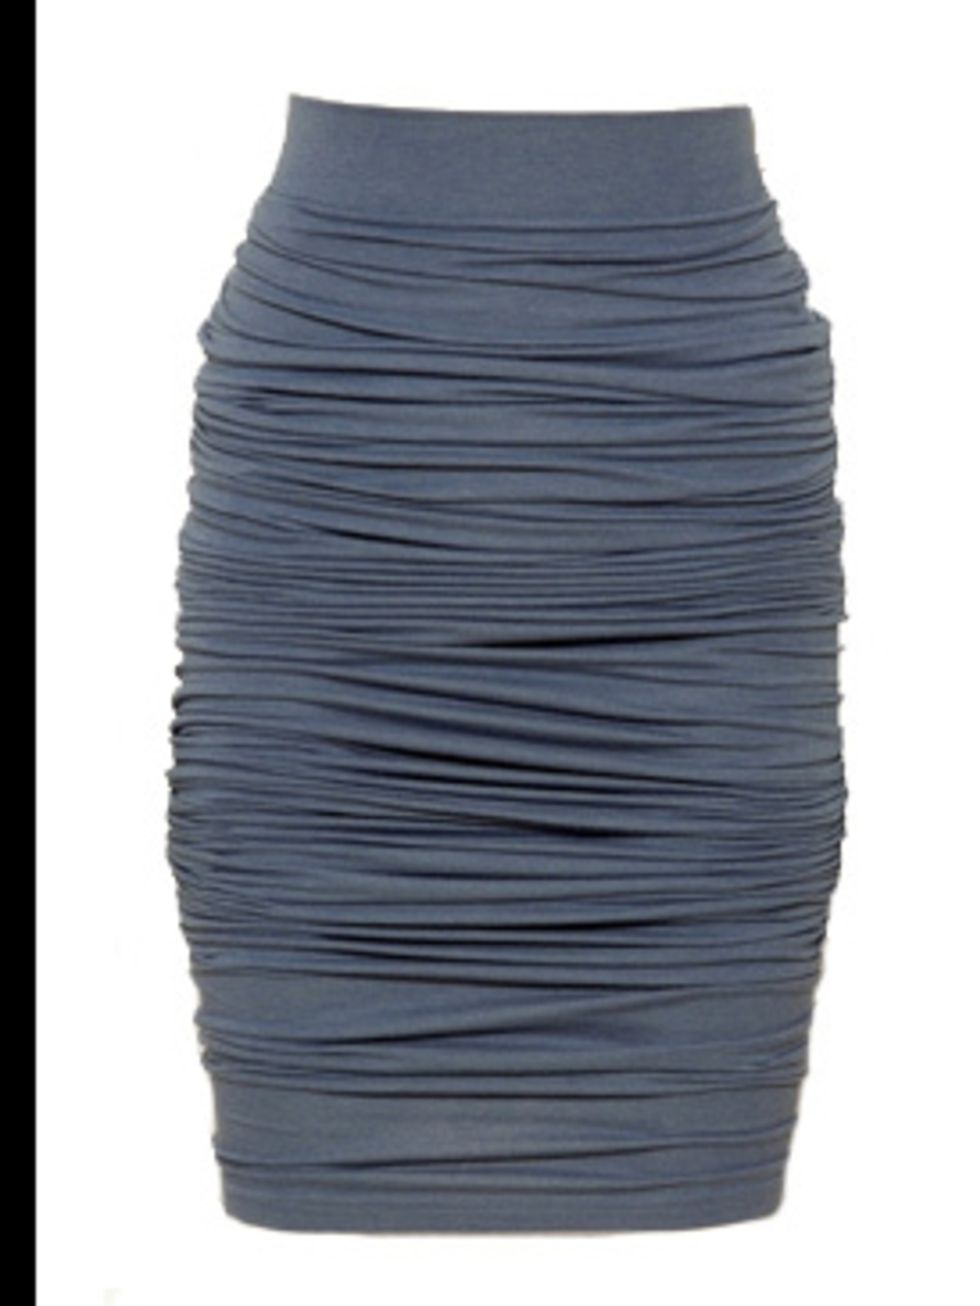 <p>Skirt, £95 by Rani Jones at <a href="http://www.fashion-conscience.com/product_details.asp?ProductID=cgMF&amp;productsubID=dgUFdQ%3D%3D&amp;PL=1dd185ew">Fashion Conscience</a></p>